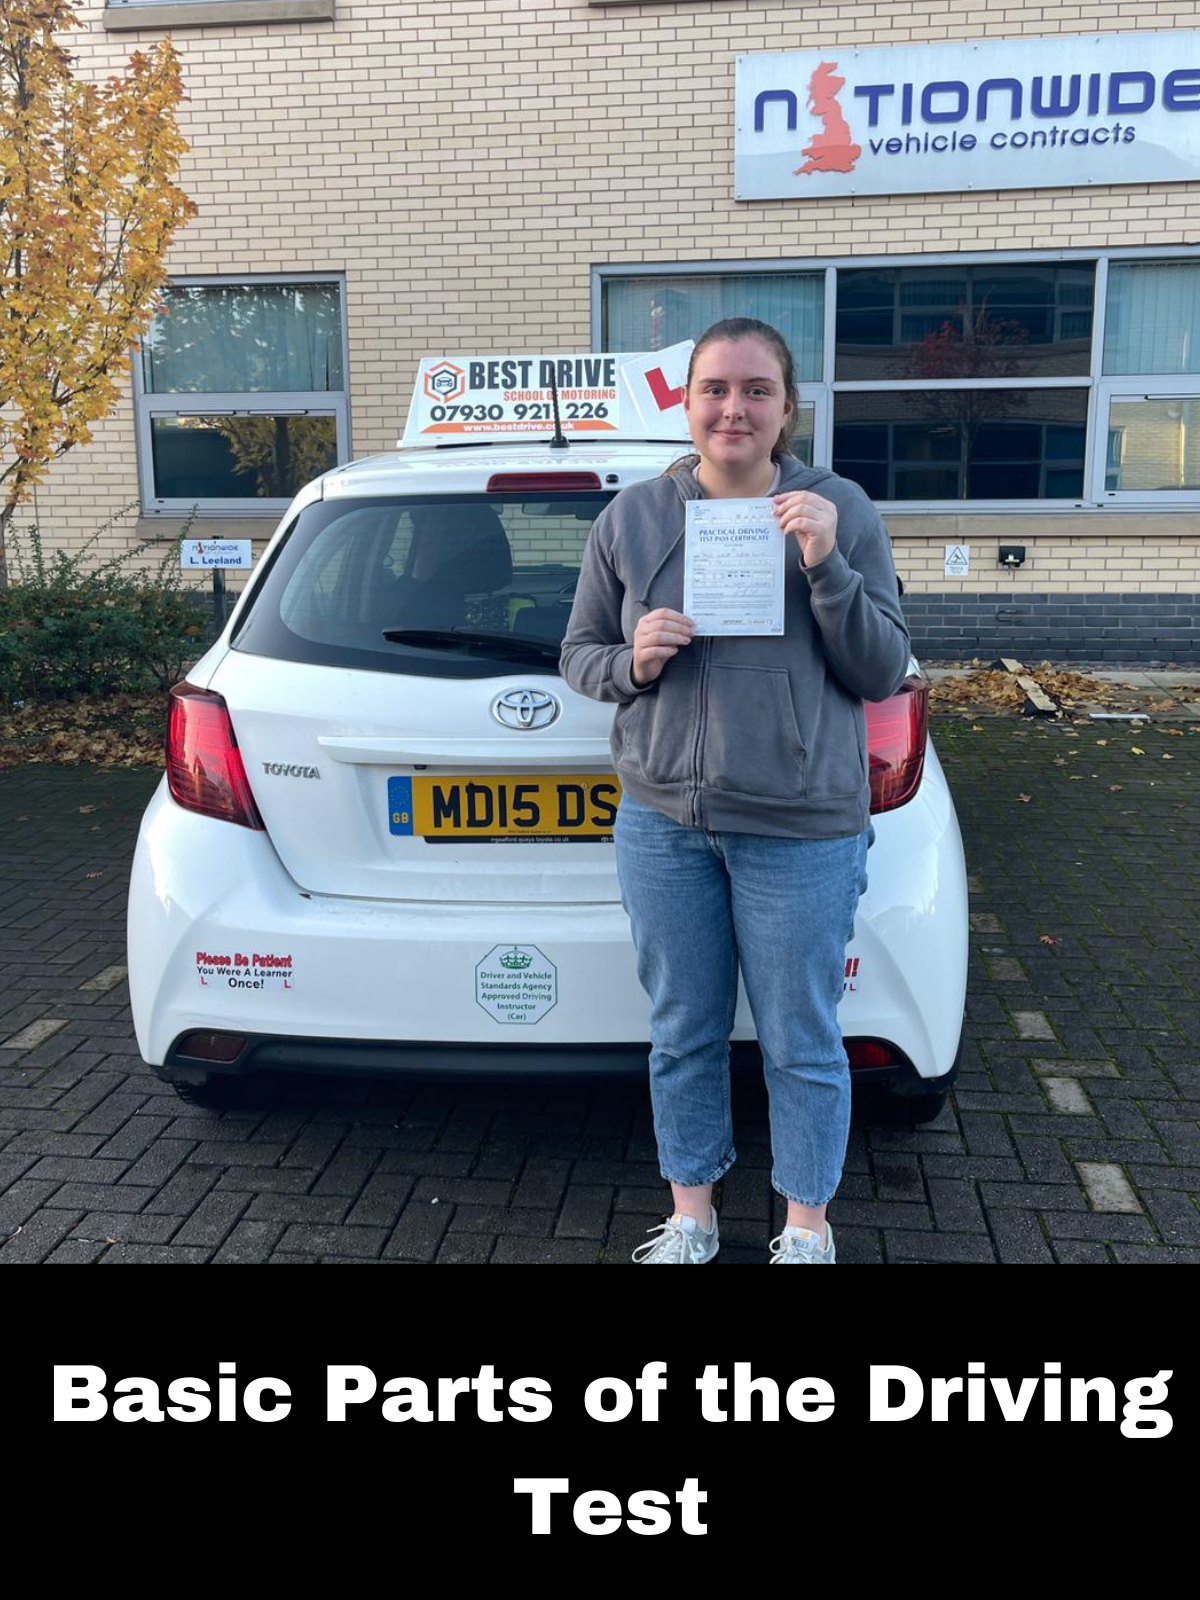 Basic Parts of the Driving Test